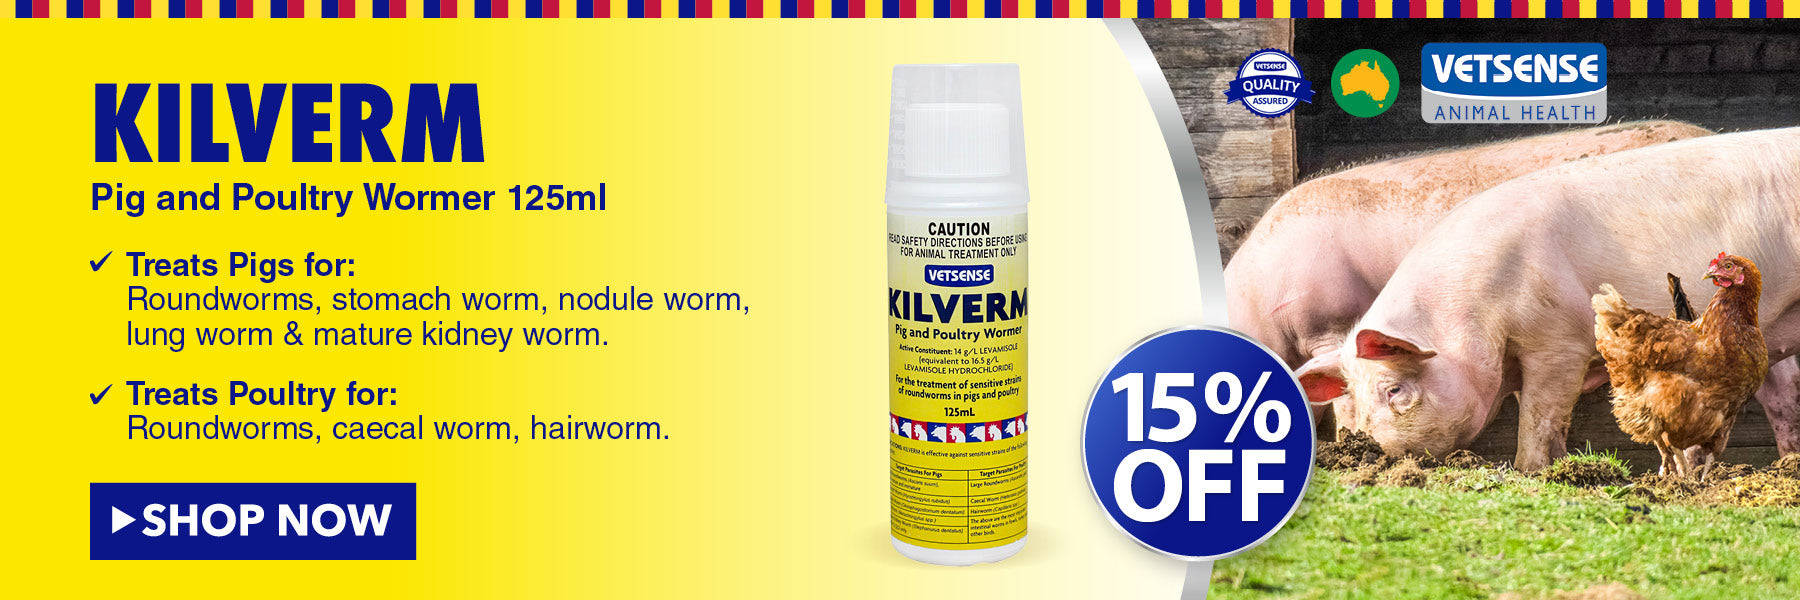 Kilverm Pig & Poultry Wormer ON SALE NOW